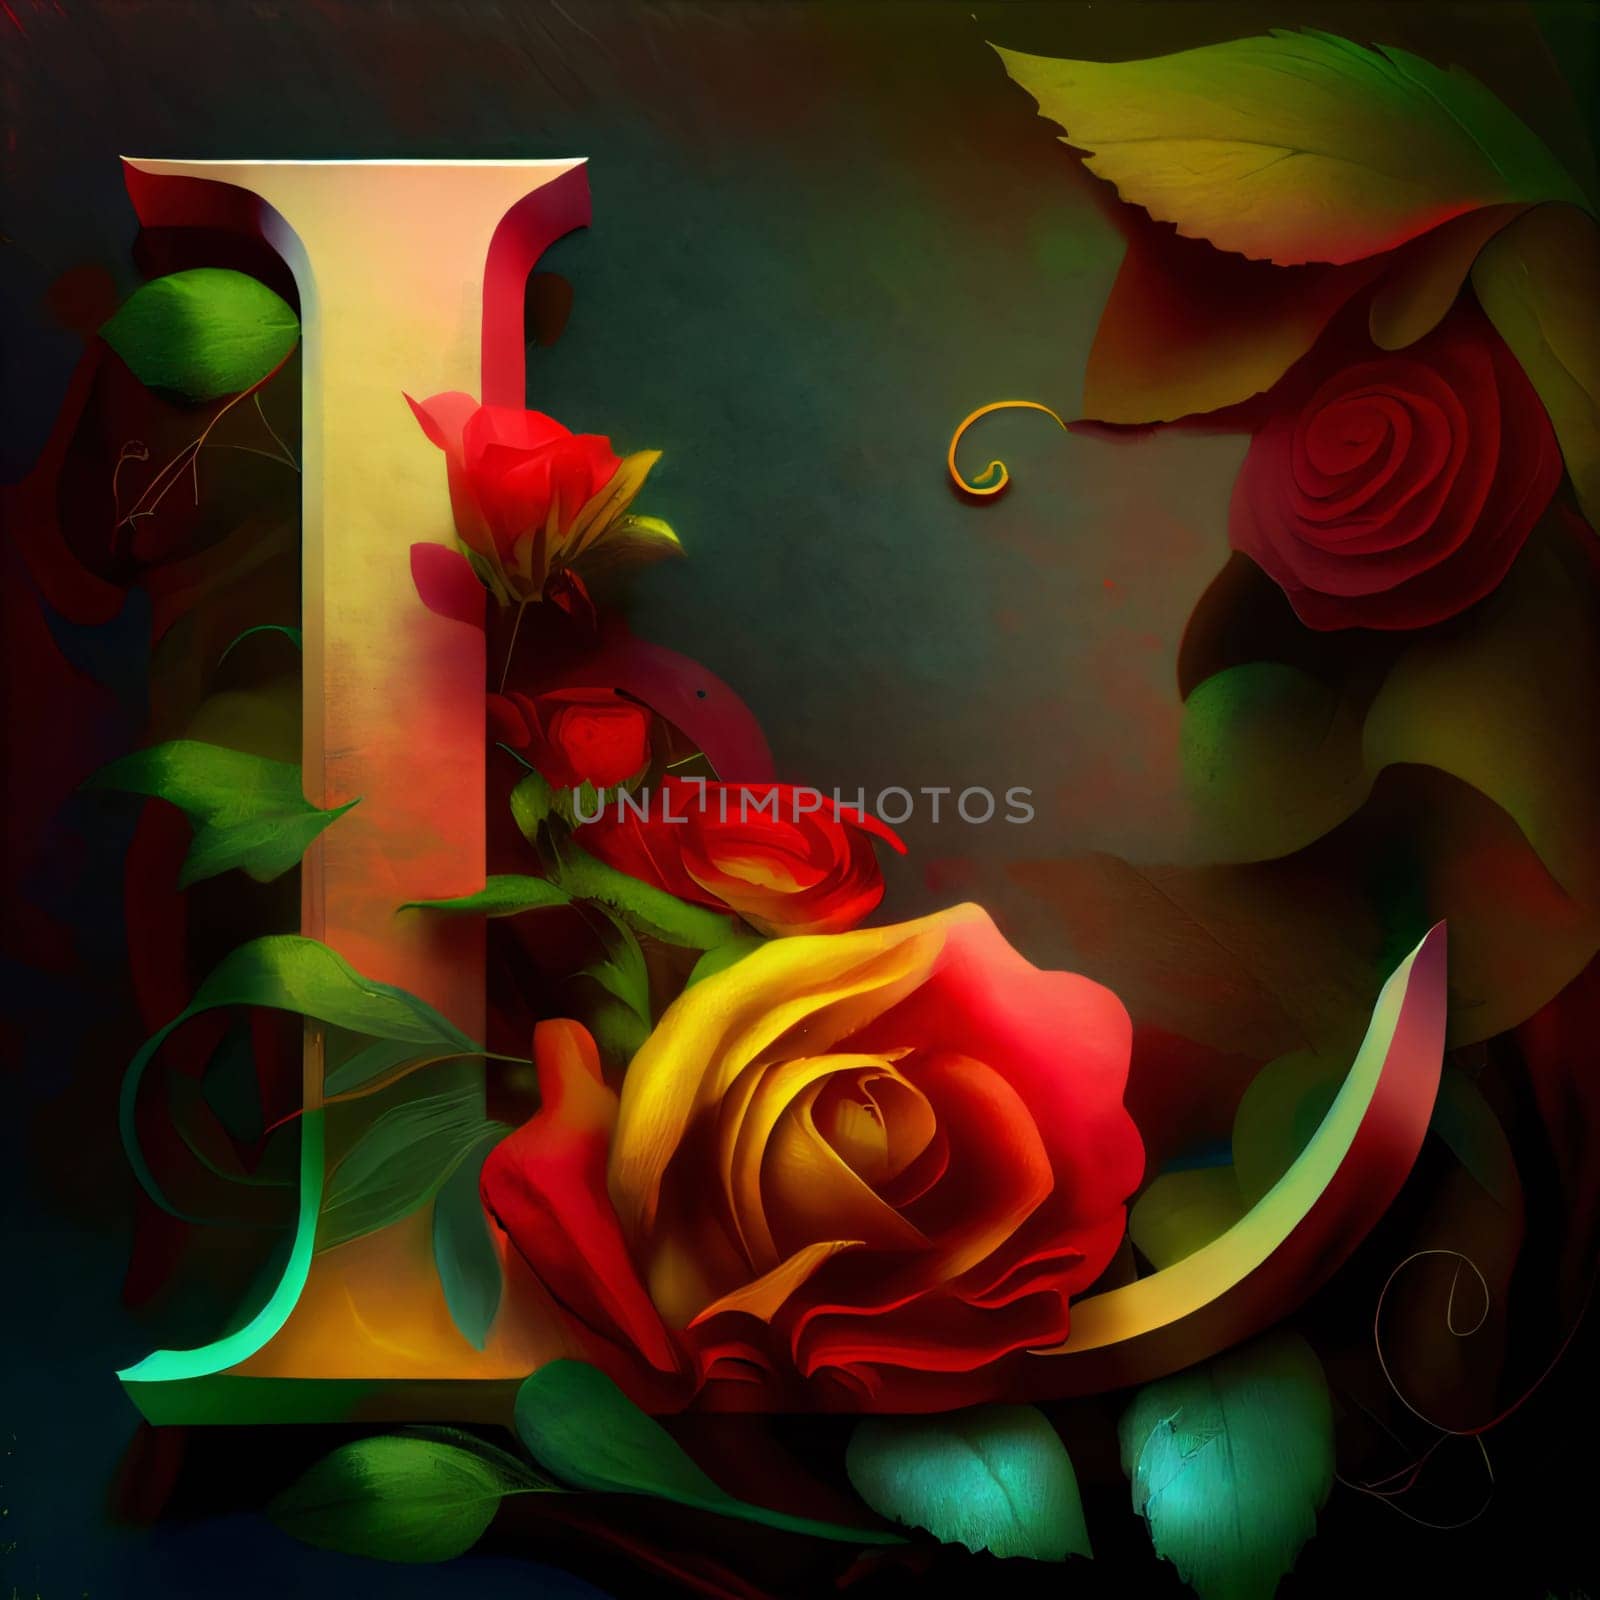 Graphic alphabet letters: Grunge floral alphabet with rose flowers and leaves. Letter L